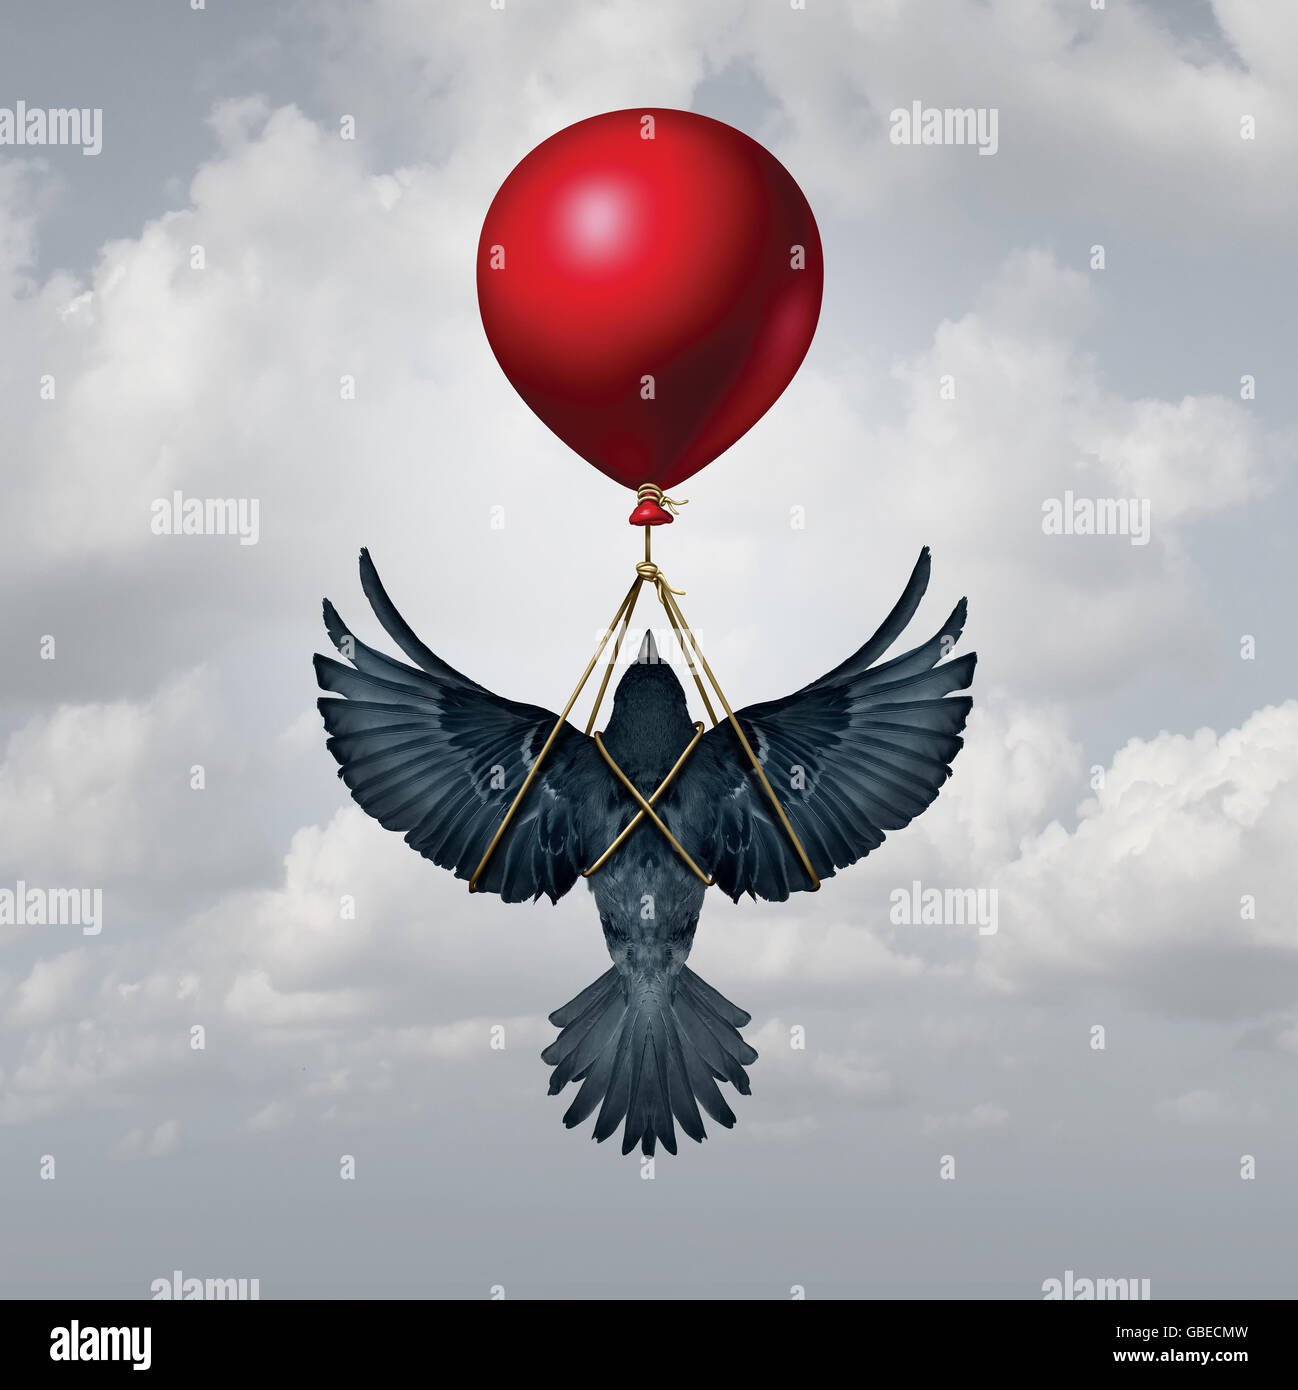 Assisted living concept as a bird with open wings being supported by a balloon as a funding and financial backing symbol with 3D illustration elements. Stock Photo